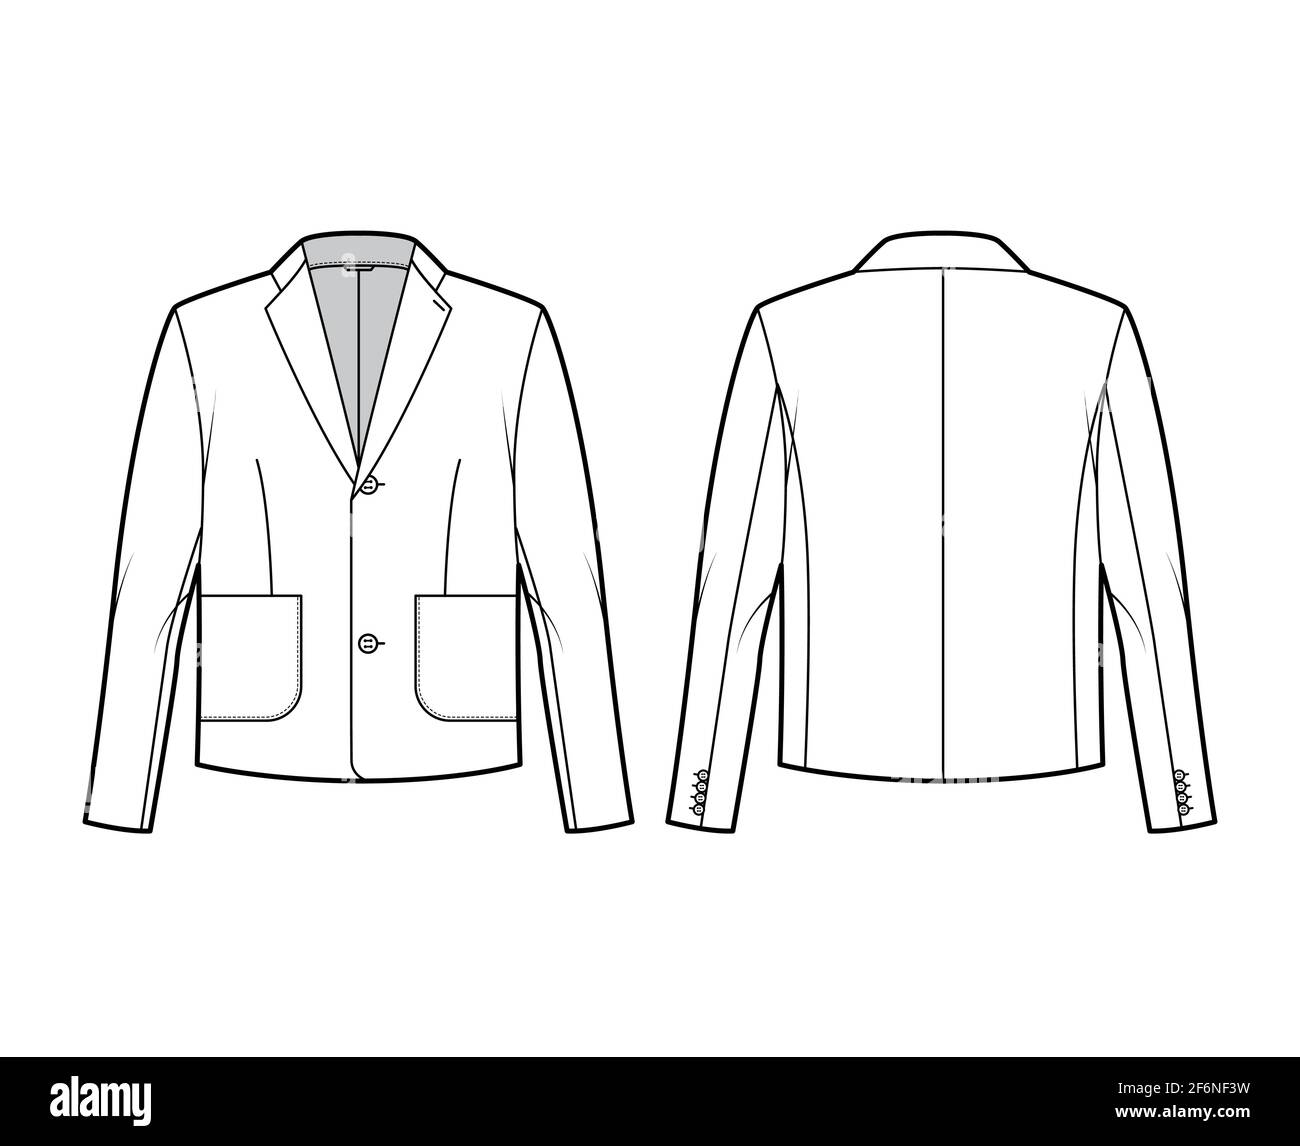 Blazer jacket suit technical fashion illustration with long sleeves ...